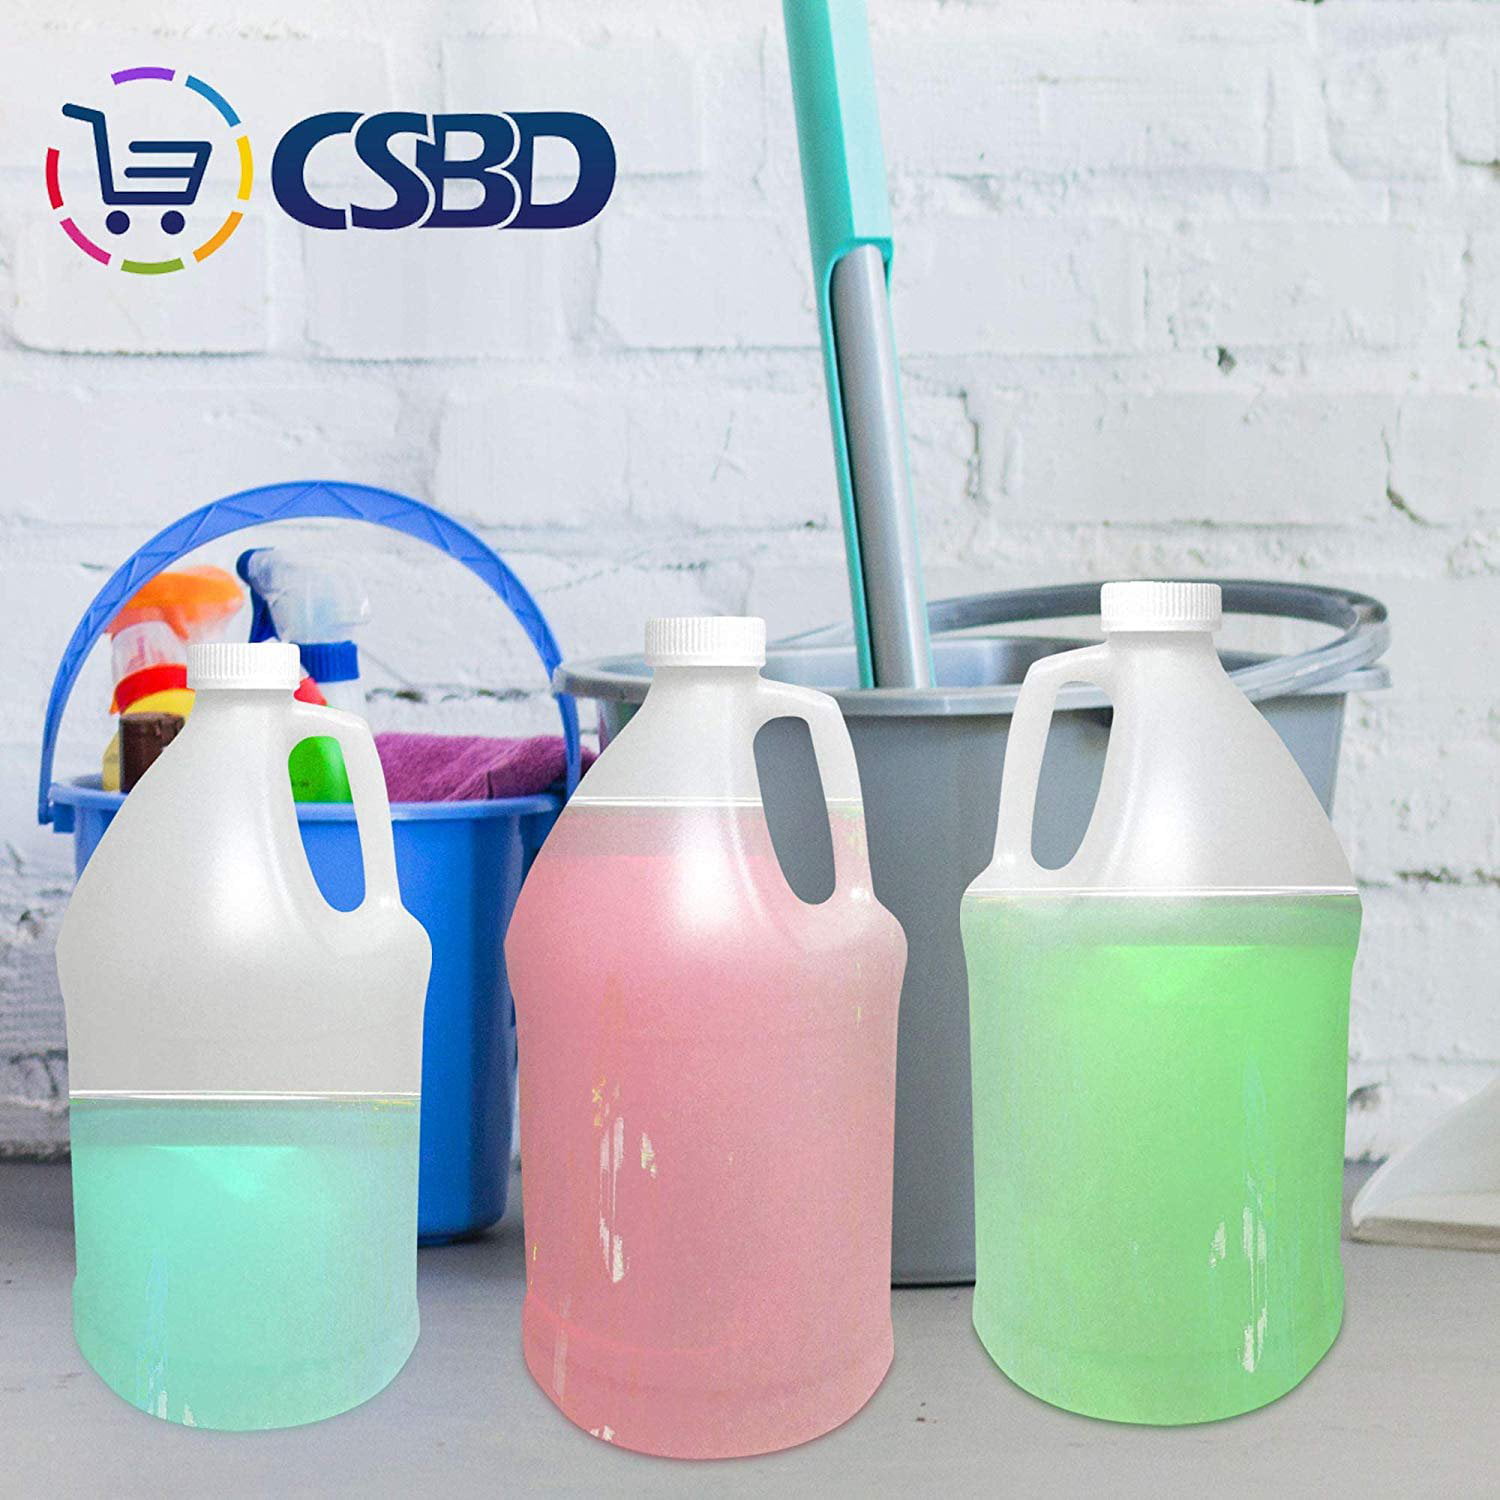  CSBD 1/2 Gallon Plastic Jugs with Lid for Water, Milk, Juice or  Liquids, 6 Pack, Reusable and Refillable BPA-Free Containers, Residential  or Commercial Use, Made in the USA: Home & Kitchen